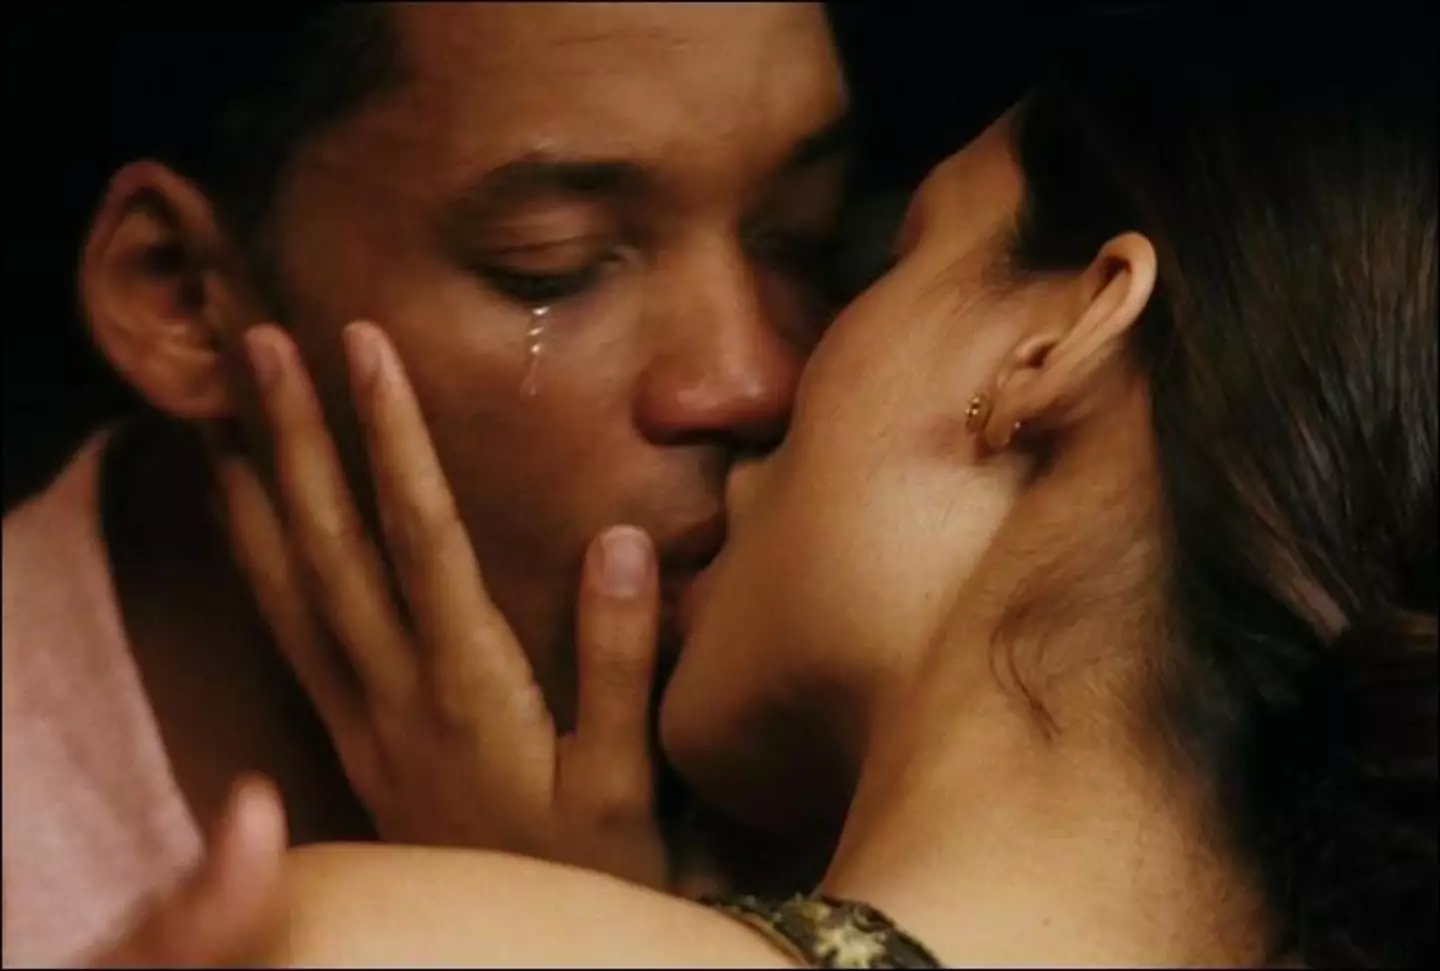 Will Smith apparently asked Jada to be present for kissing scenes in Seven Pounds.